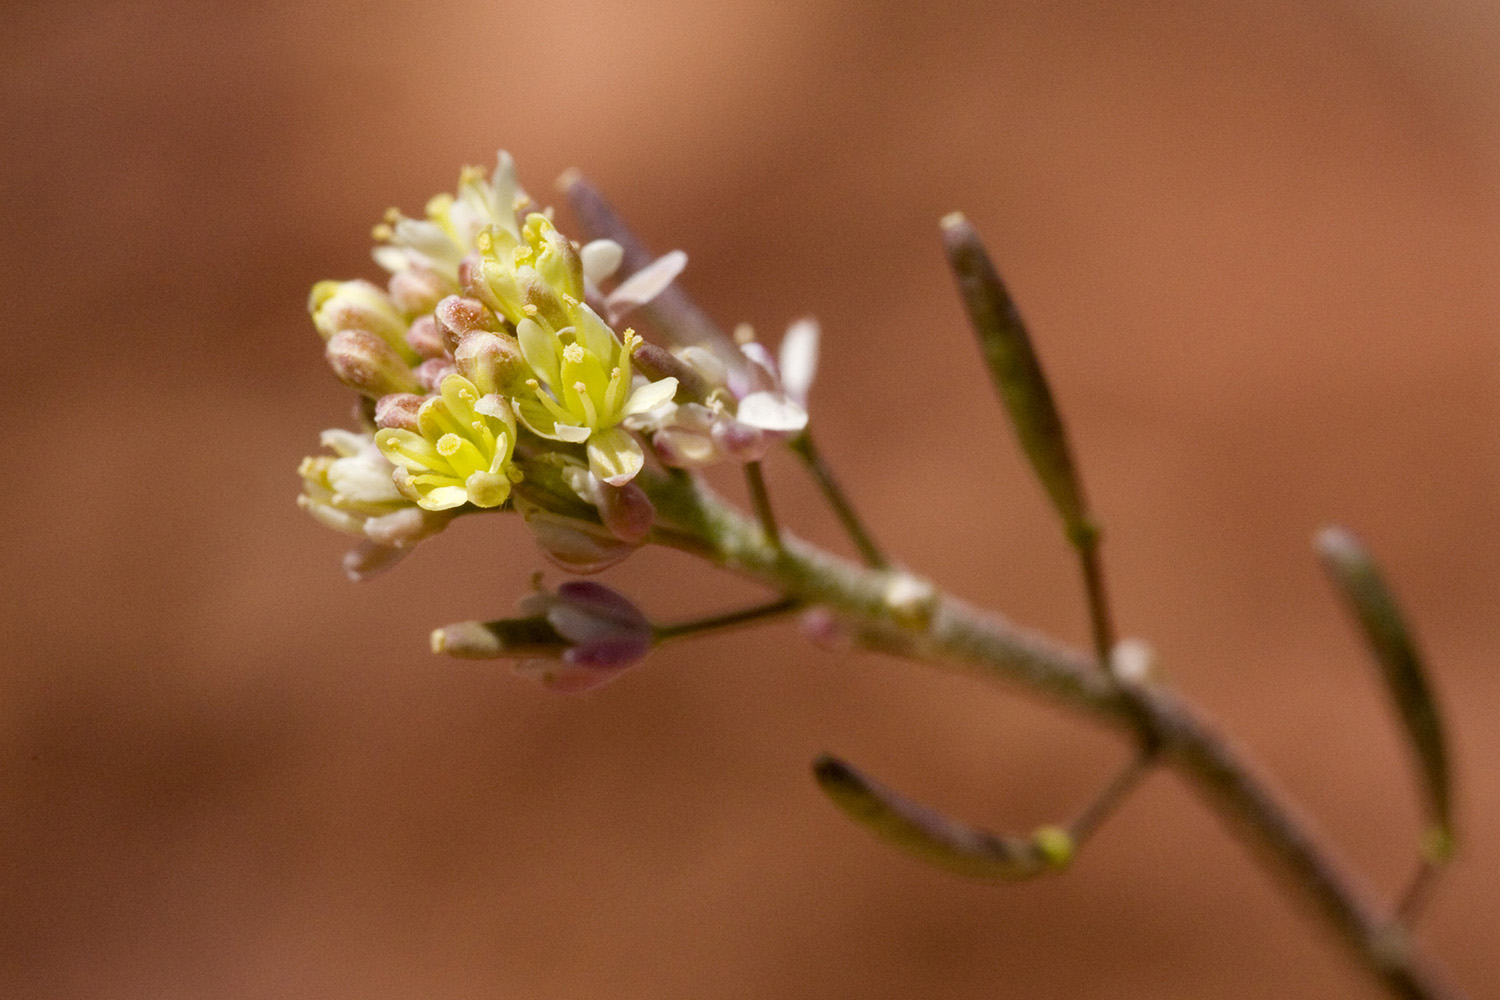 Small yellow Descurainia pinnata flowers at the end of a stem with seedpods below